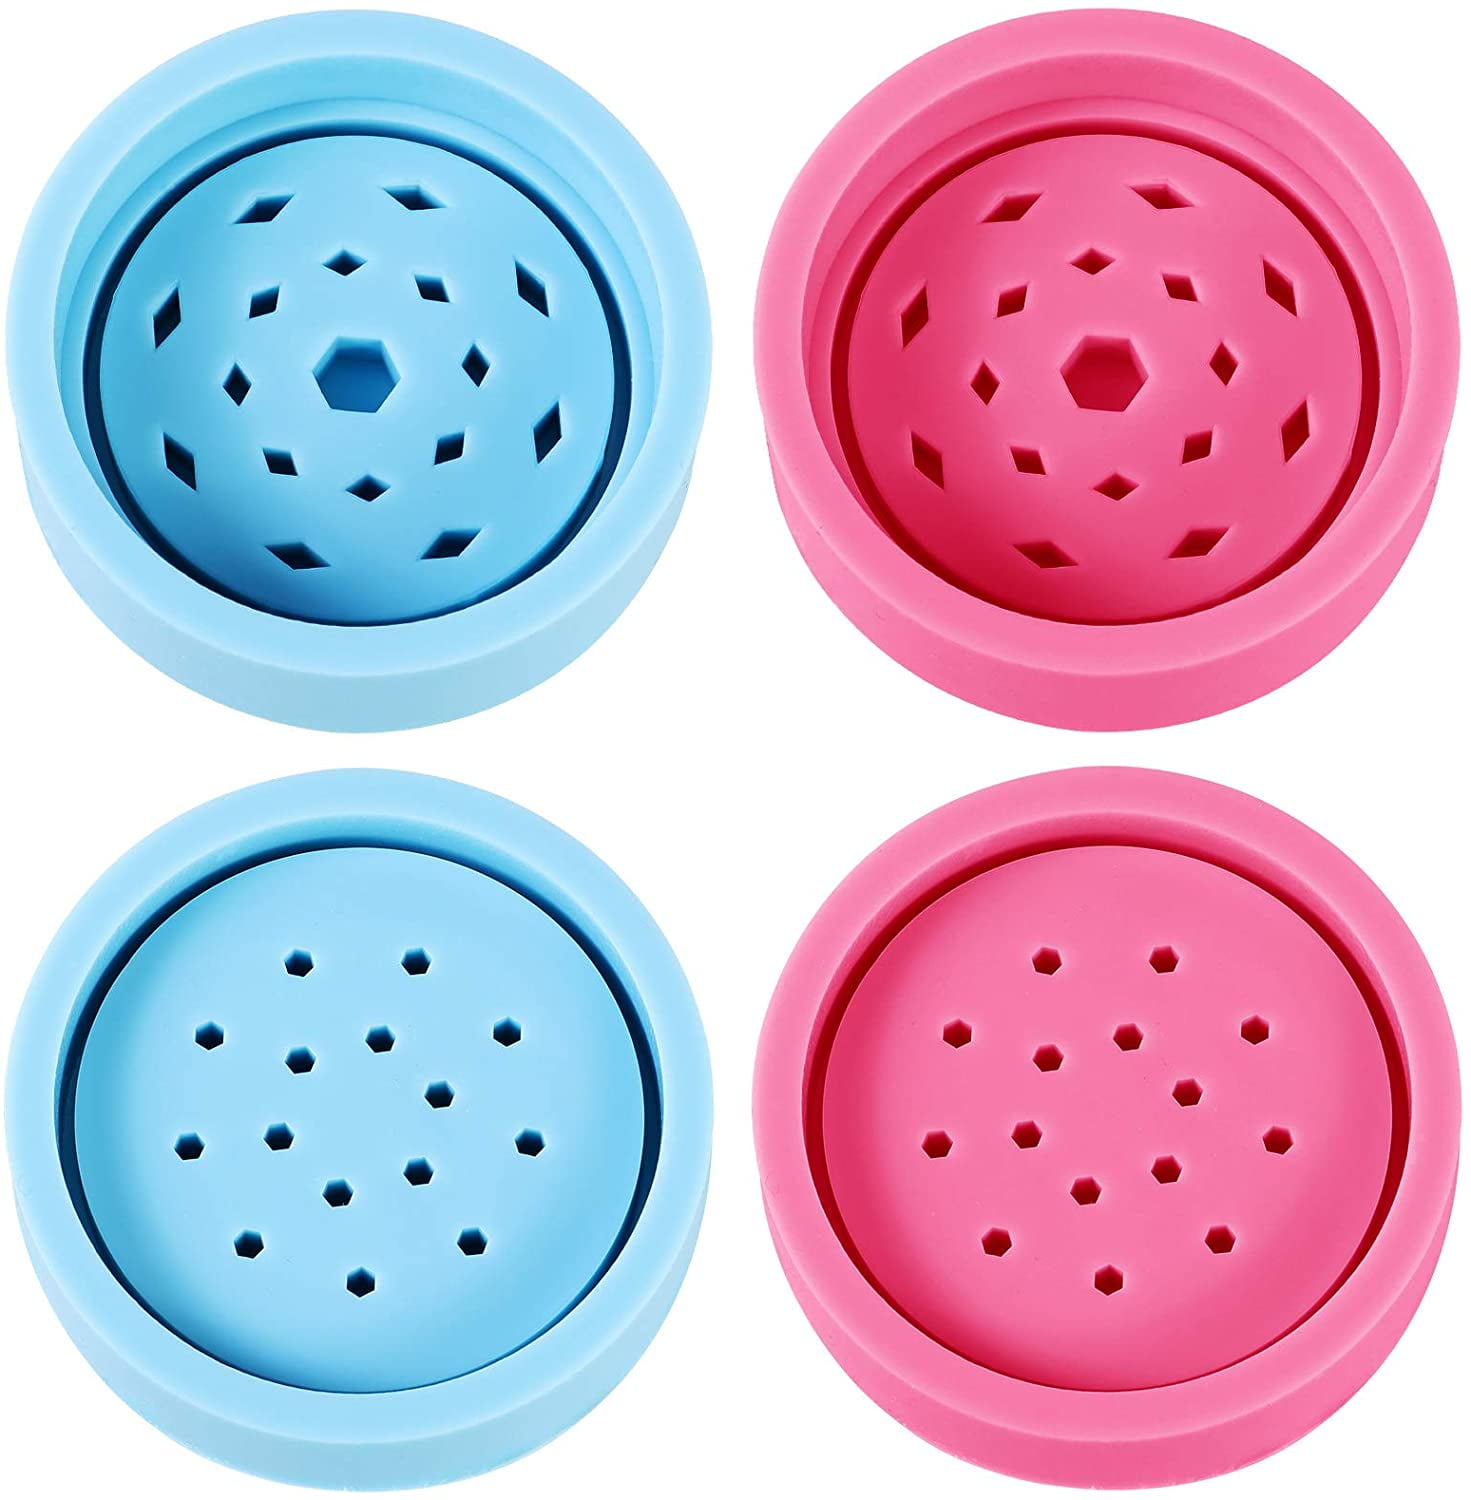 Silicone Epoxy Resin DIY Mold Leaf Herbal Herb Grinder Spice Crusher Mould Tools 